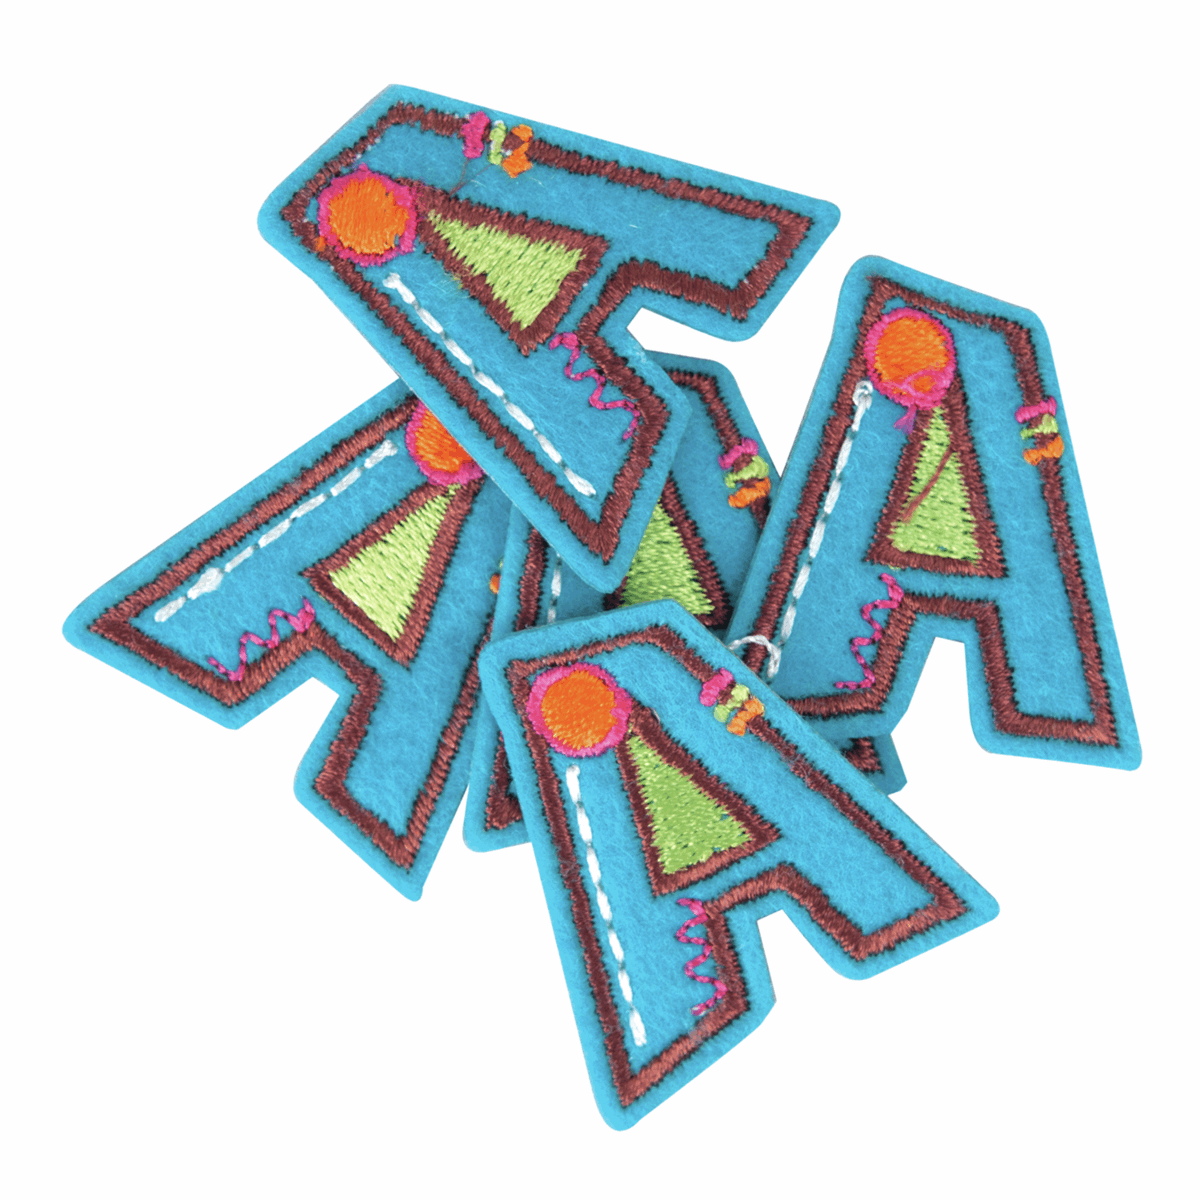 Iron-On/Sew On Alphabet Motif Patch -  Letter A